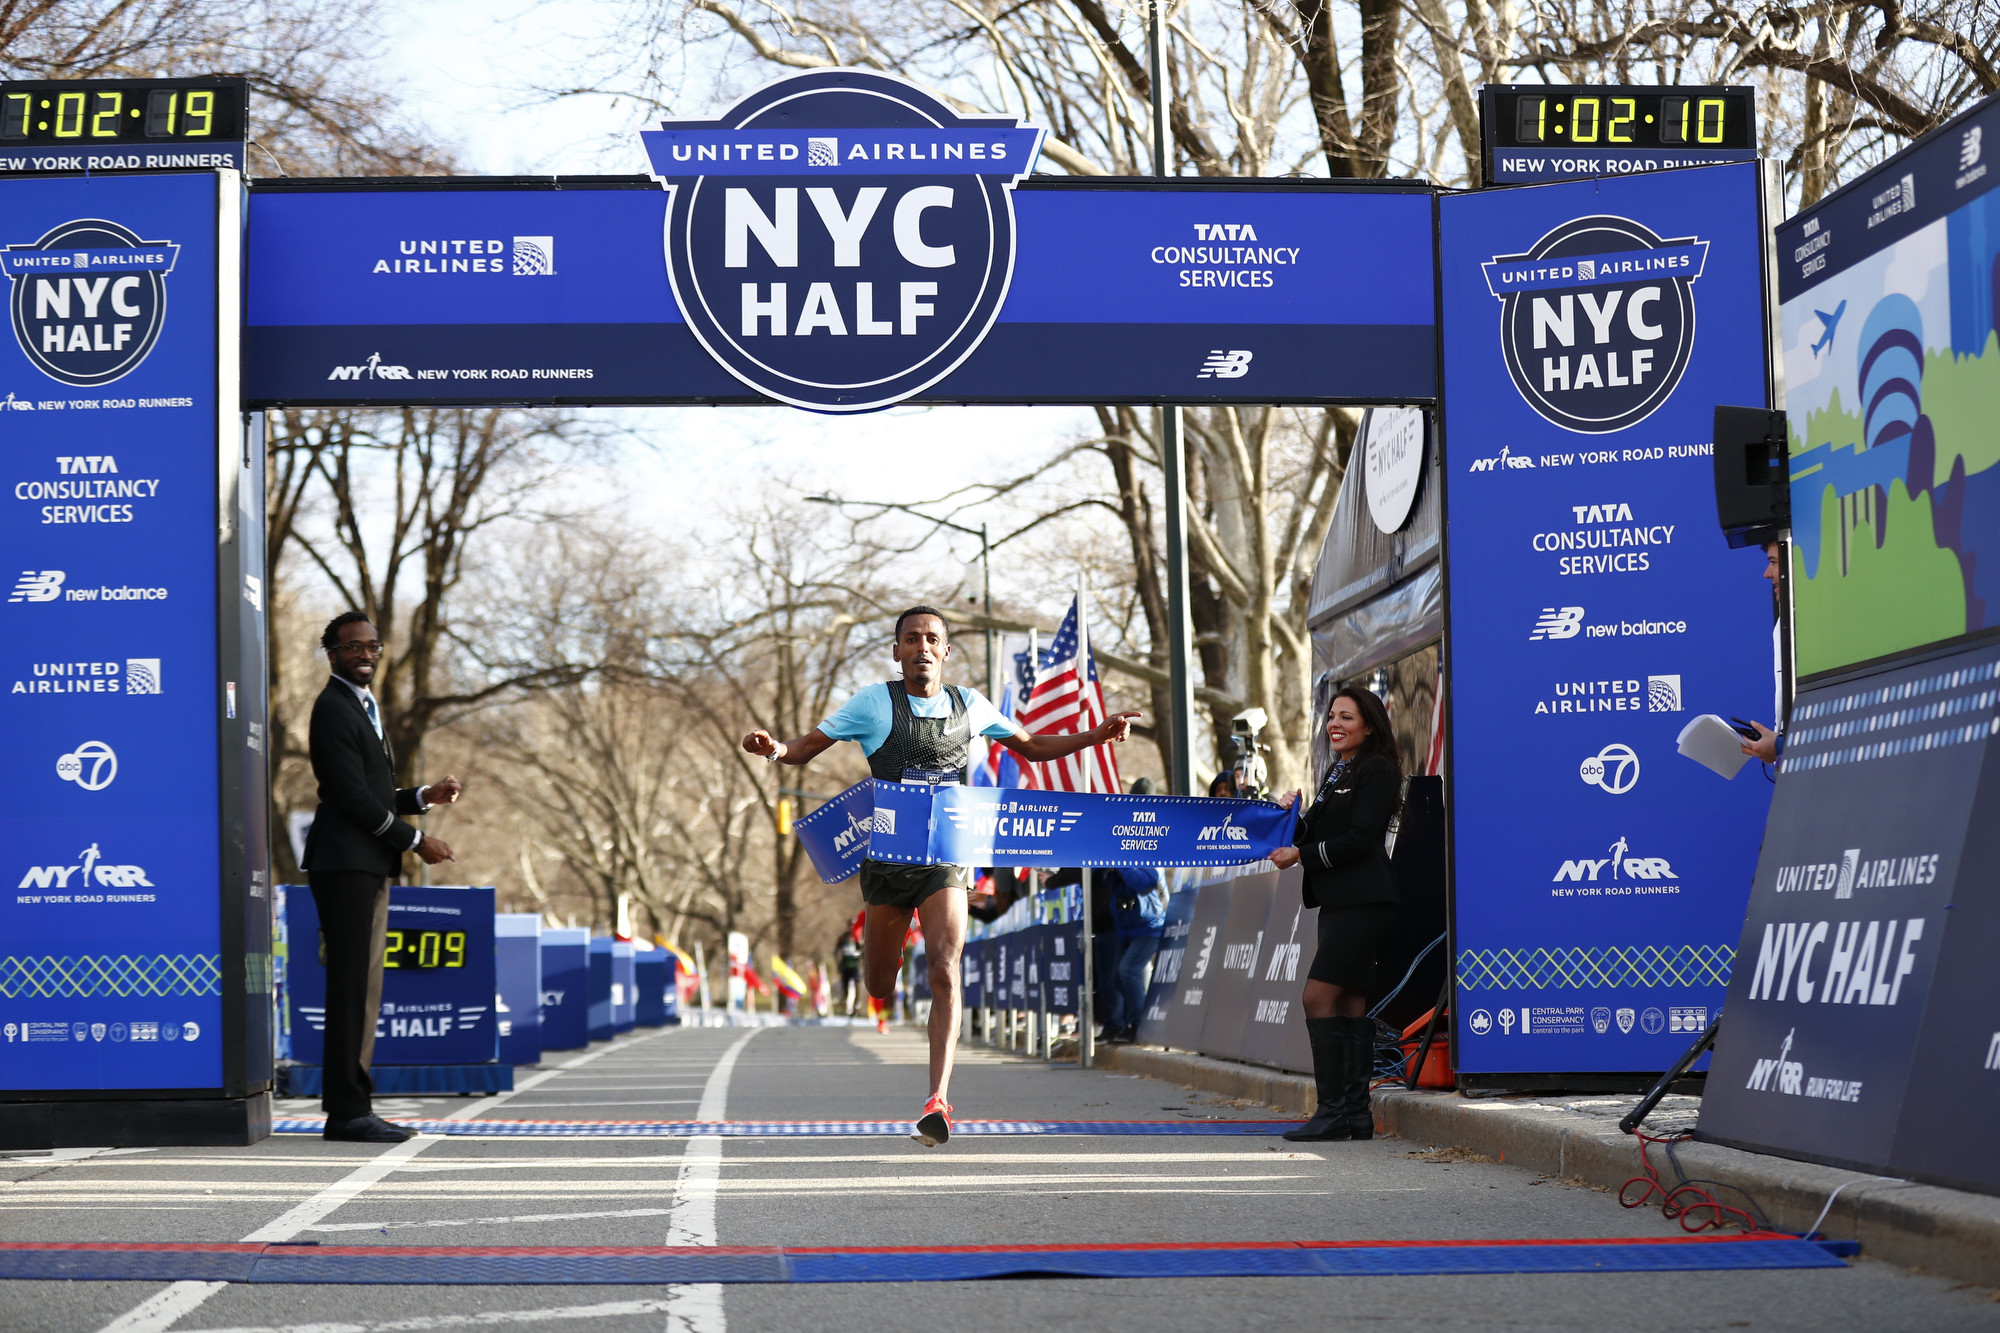 Belay Tilahun of Ethiopia and Joyciline Jepkosgei of Kenya won their New York City racing debuts in the open division 